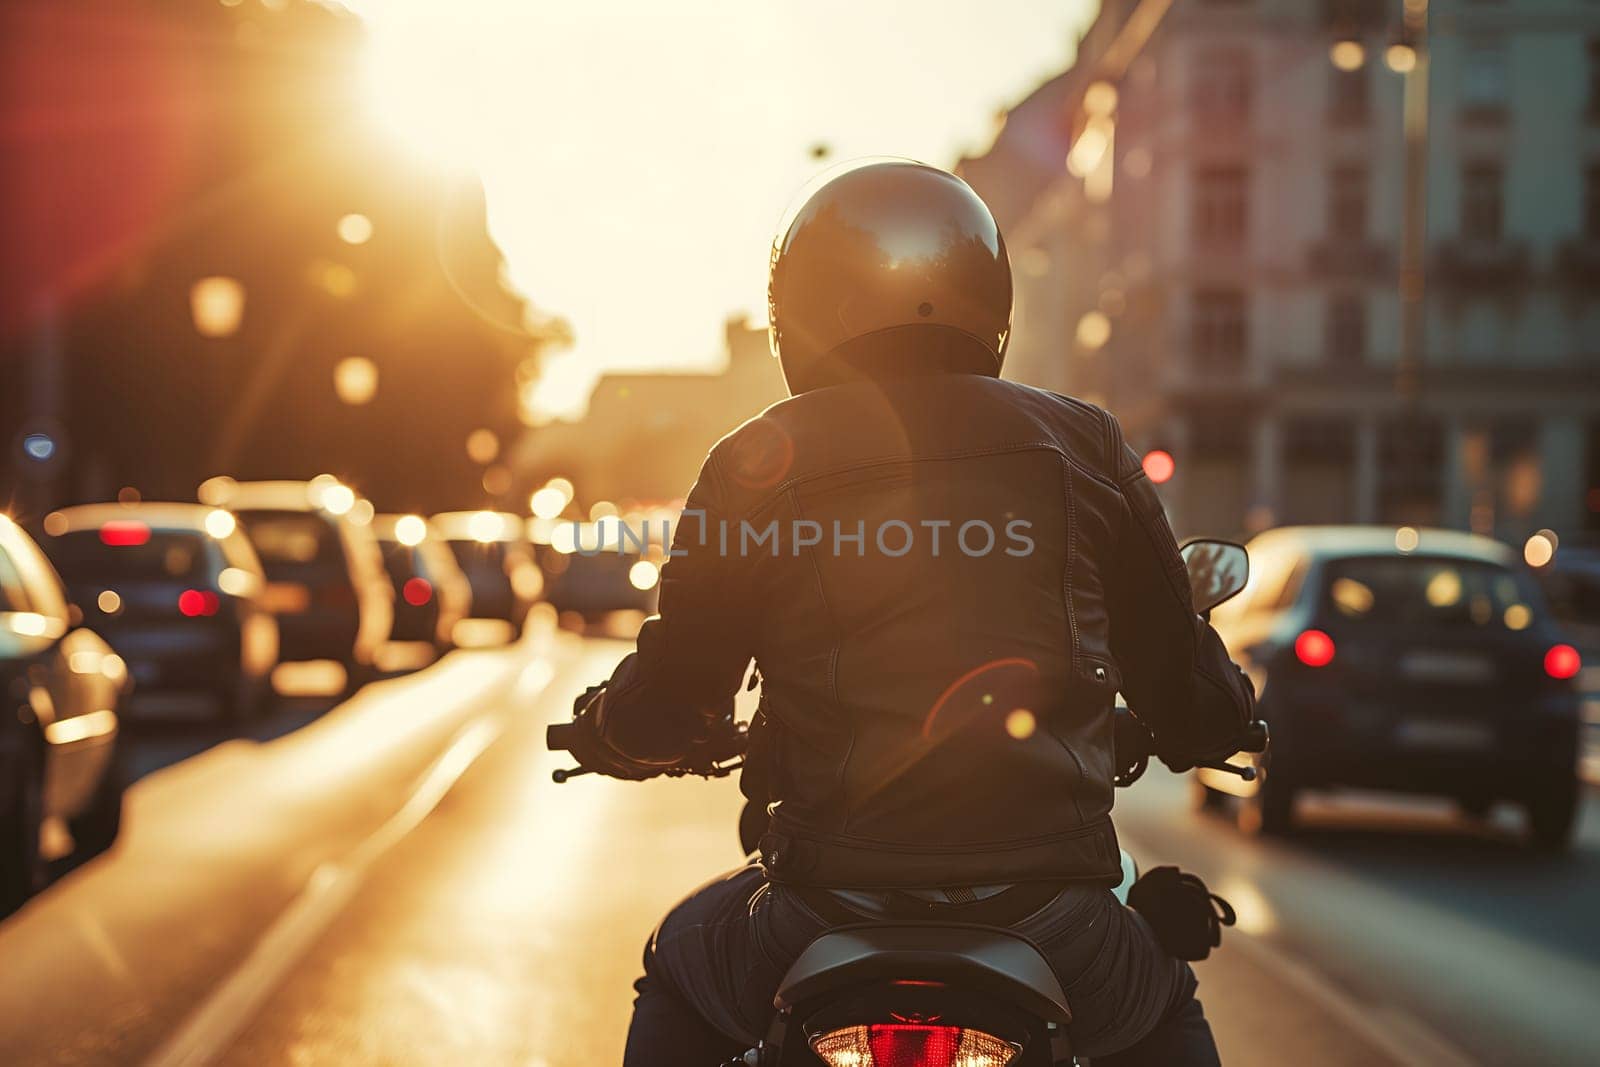 A man rides a motorcycle in city traffic, View from the back, Close-up by z1b